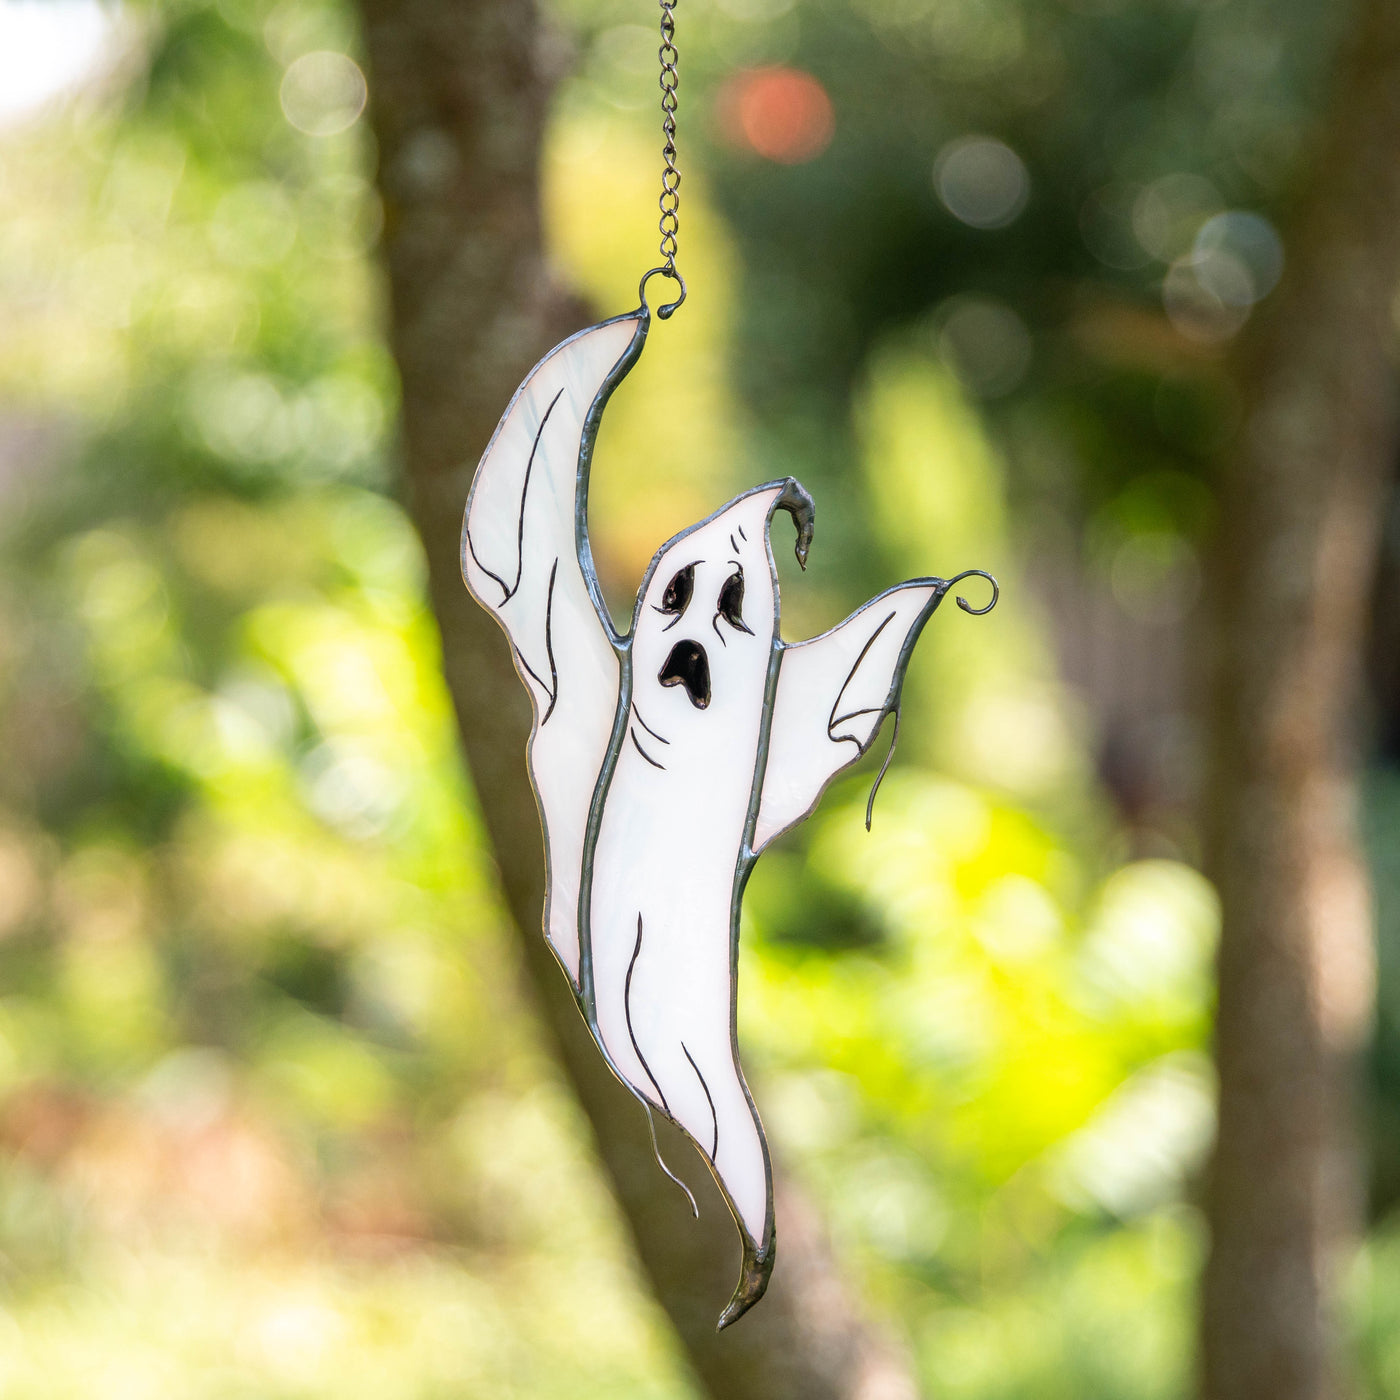 Stained glass flying ghost window hanging for Halloween decorations